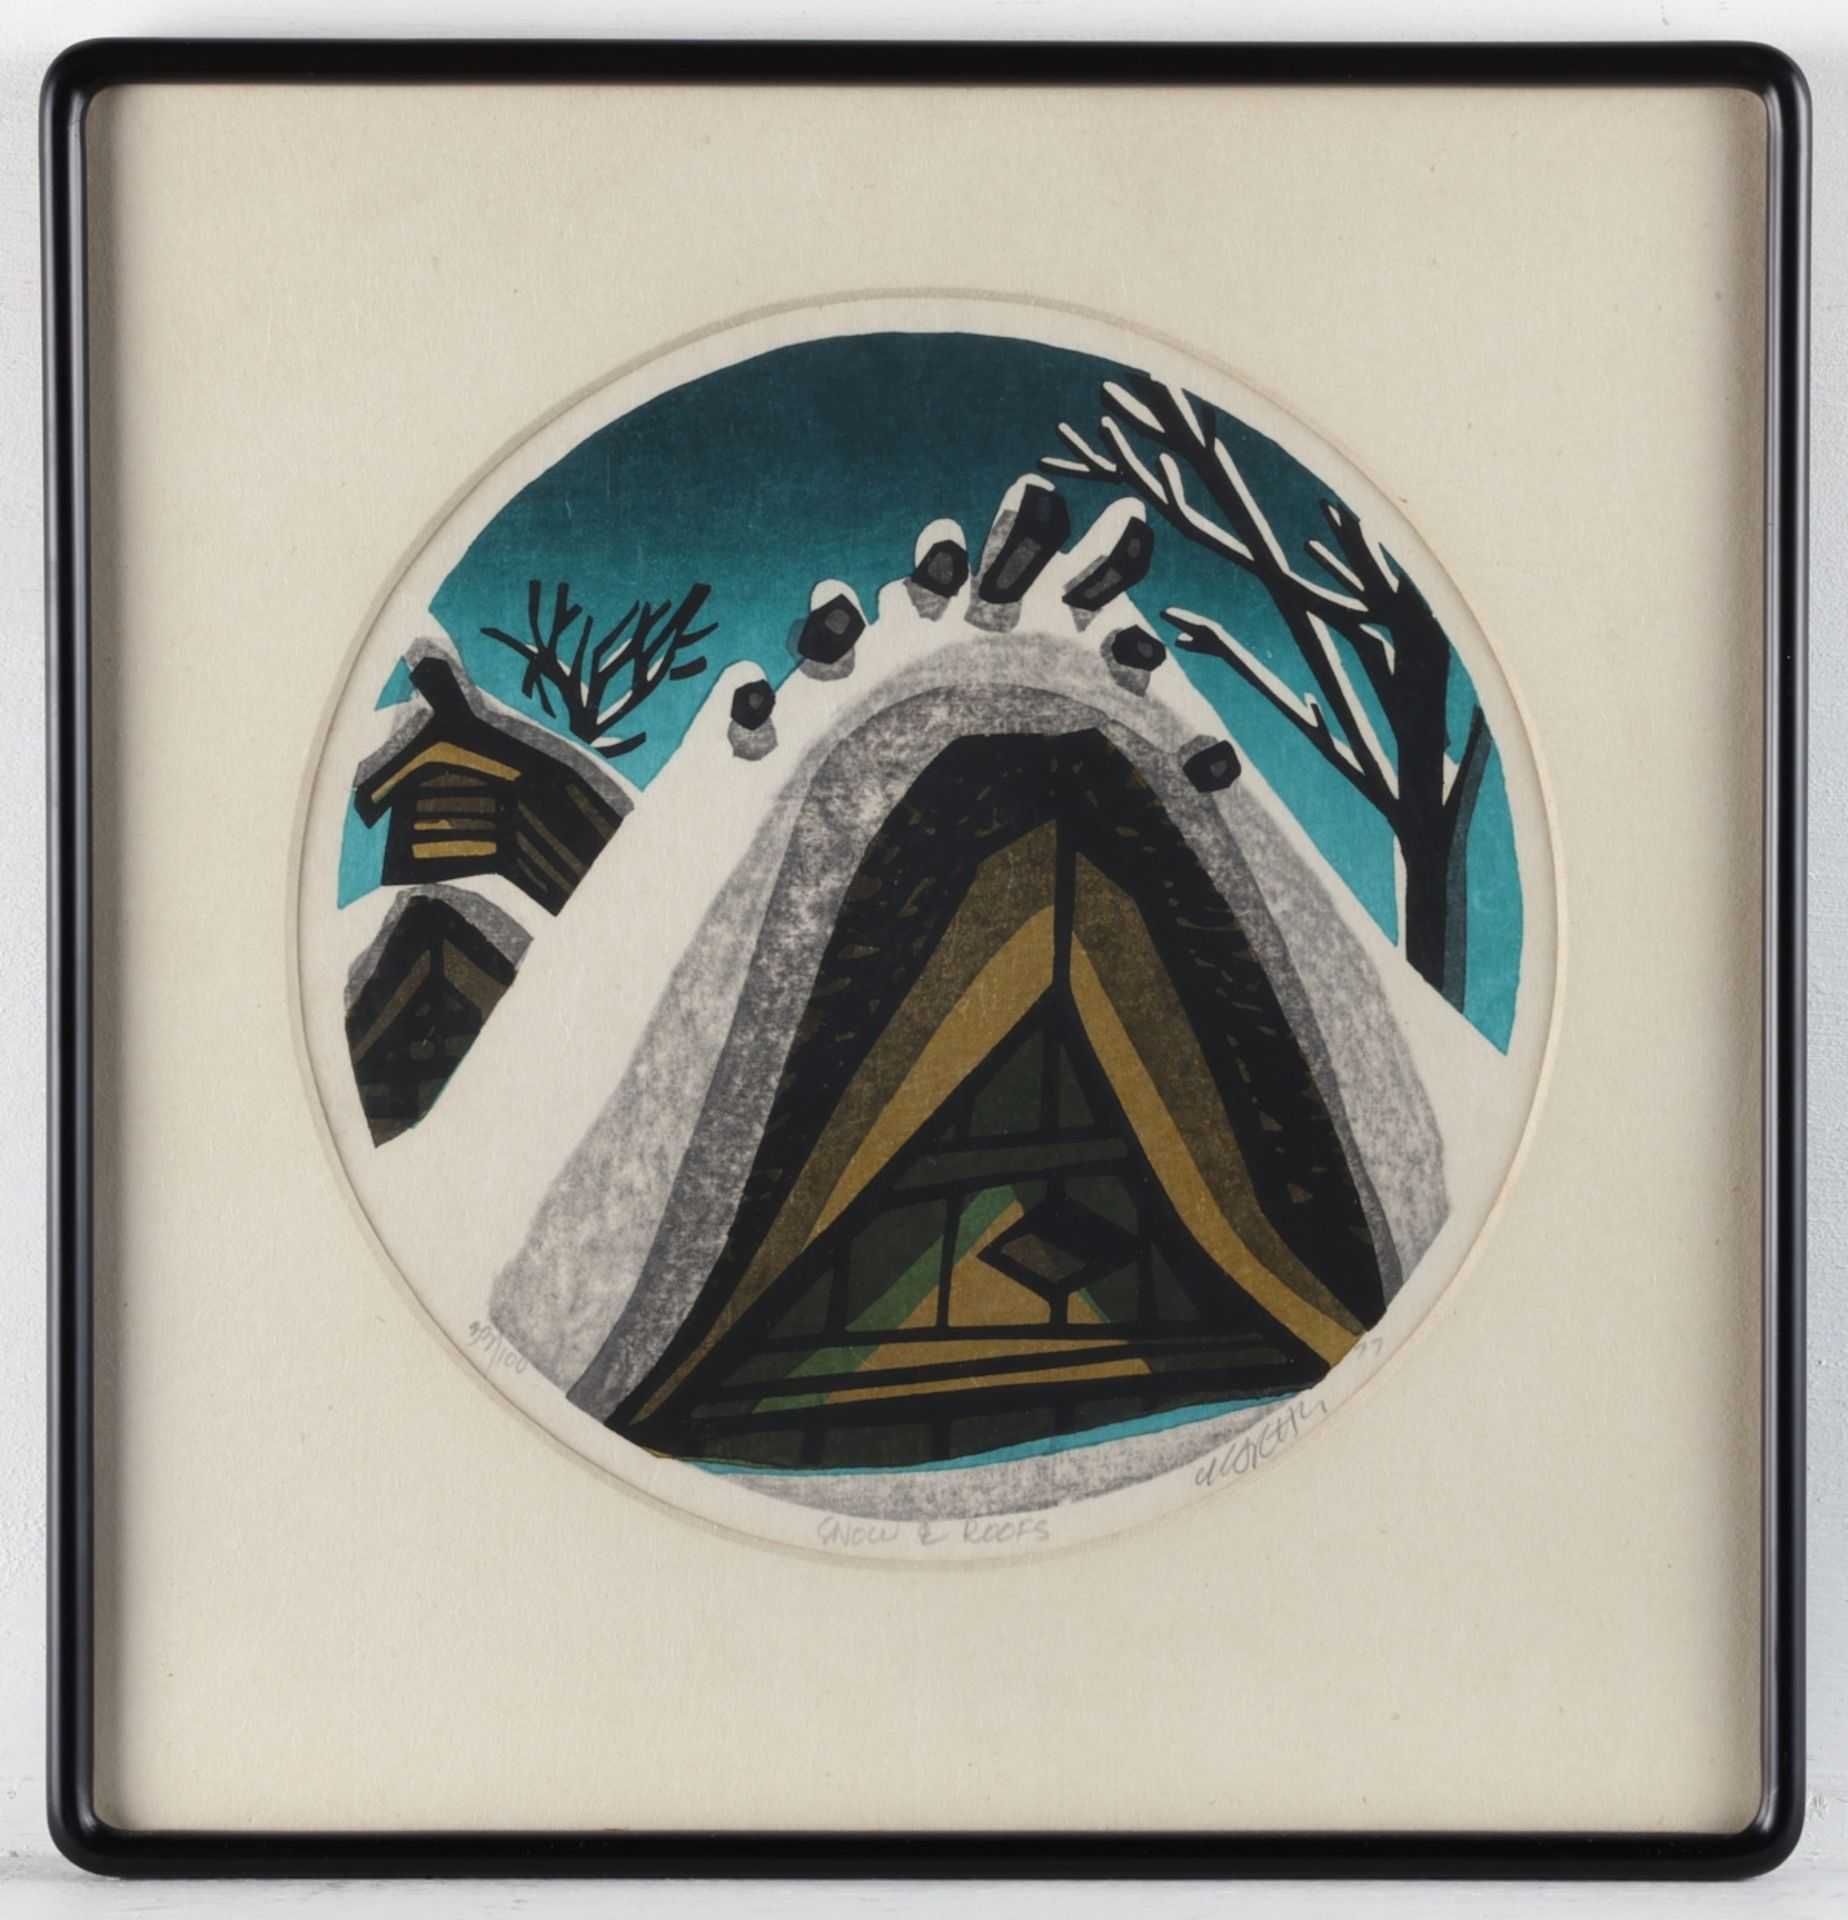 Clifton Karhu "Snow and Roofs" Woodblock Print - Image 2 of 5